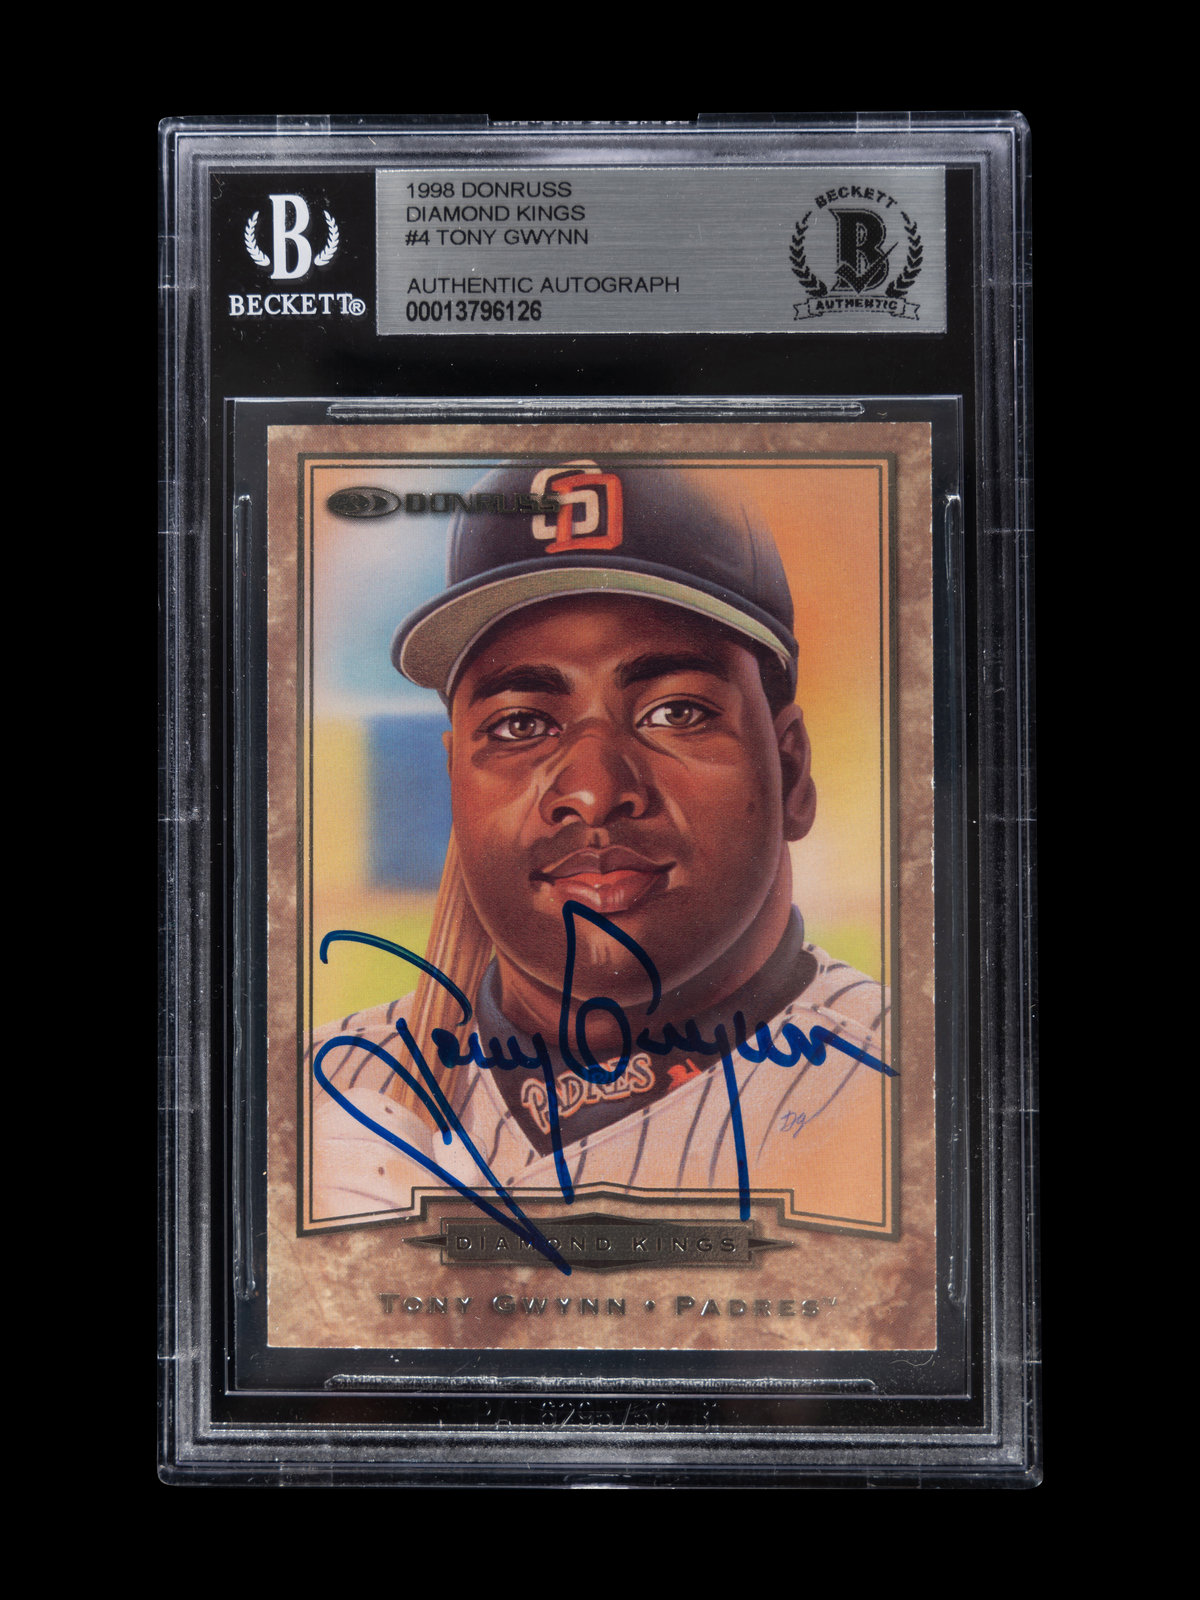 Lot Detail - 1998 Tony Gwynn Game Used and Signed San Diego Padres